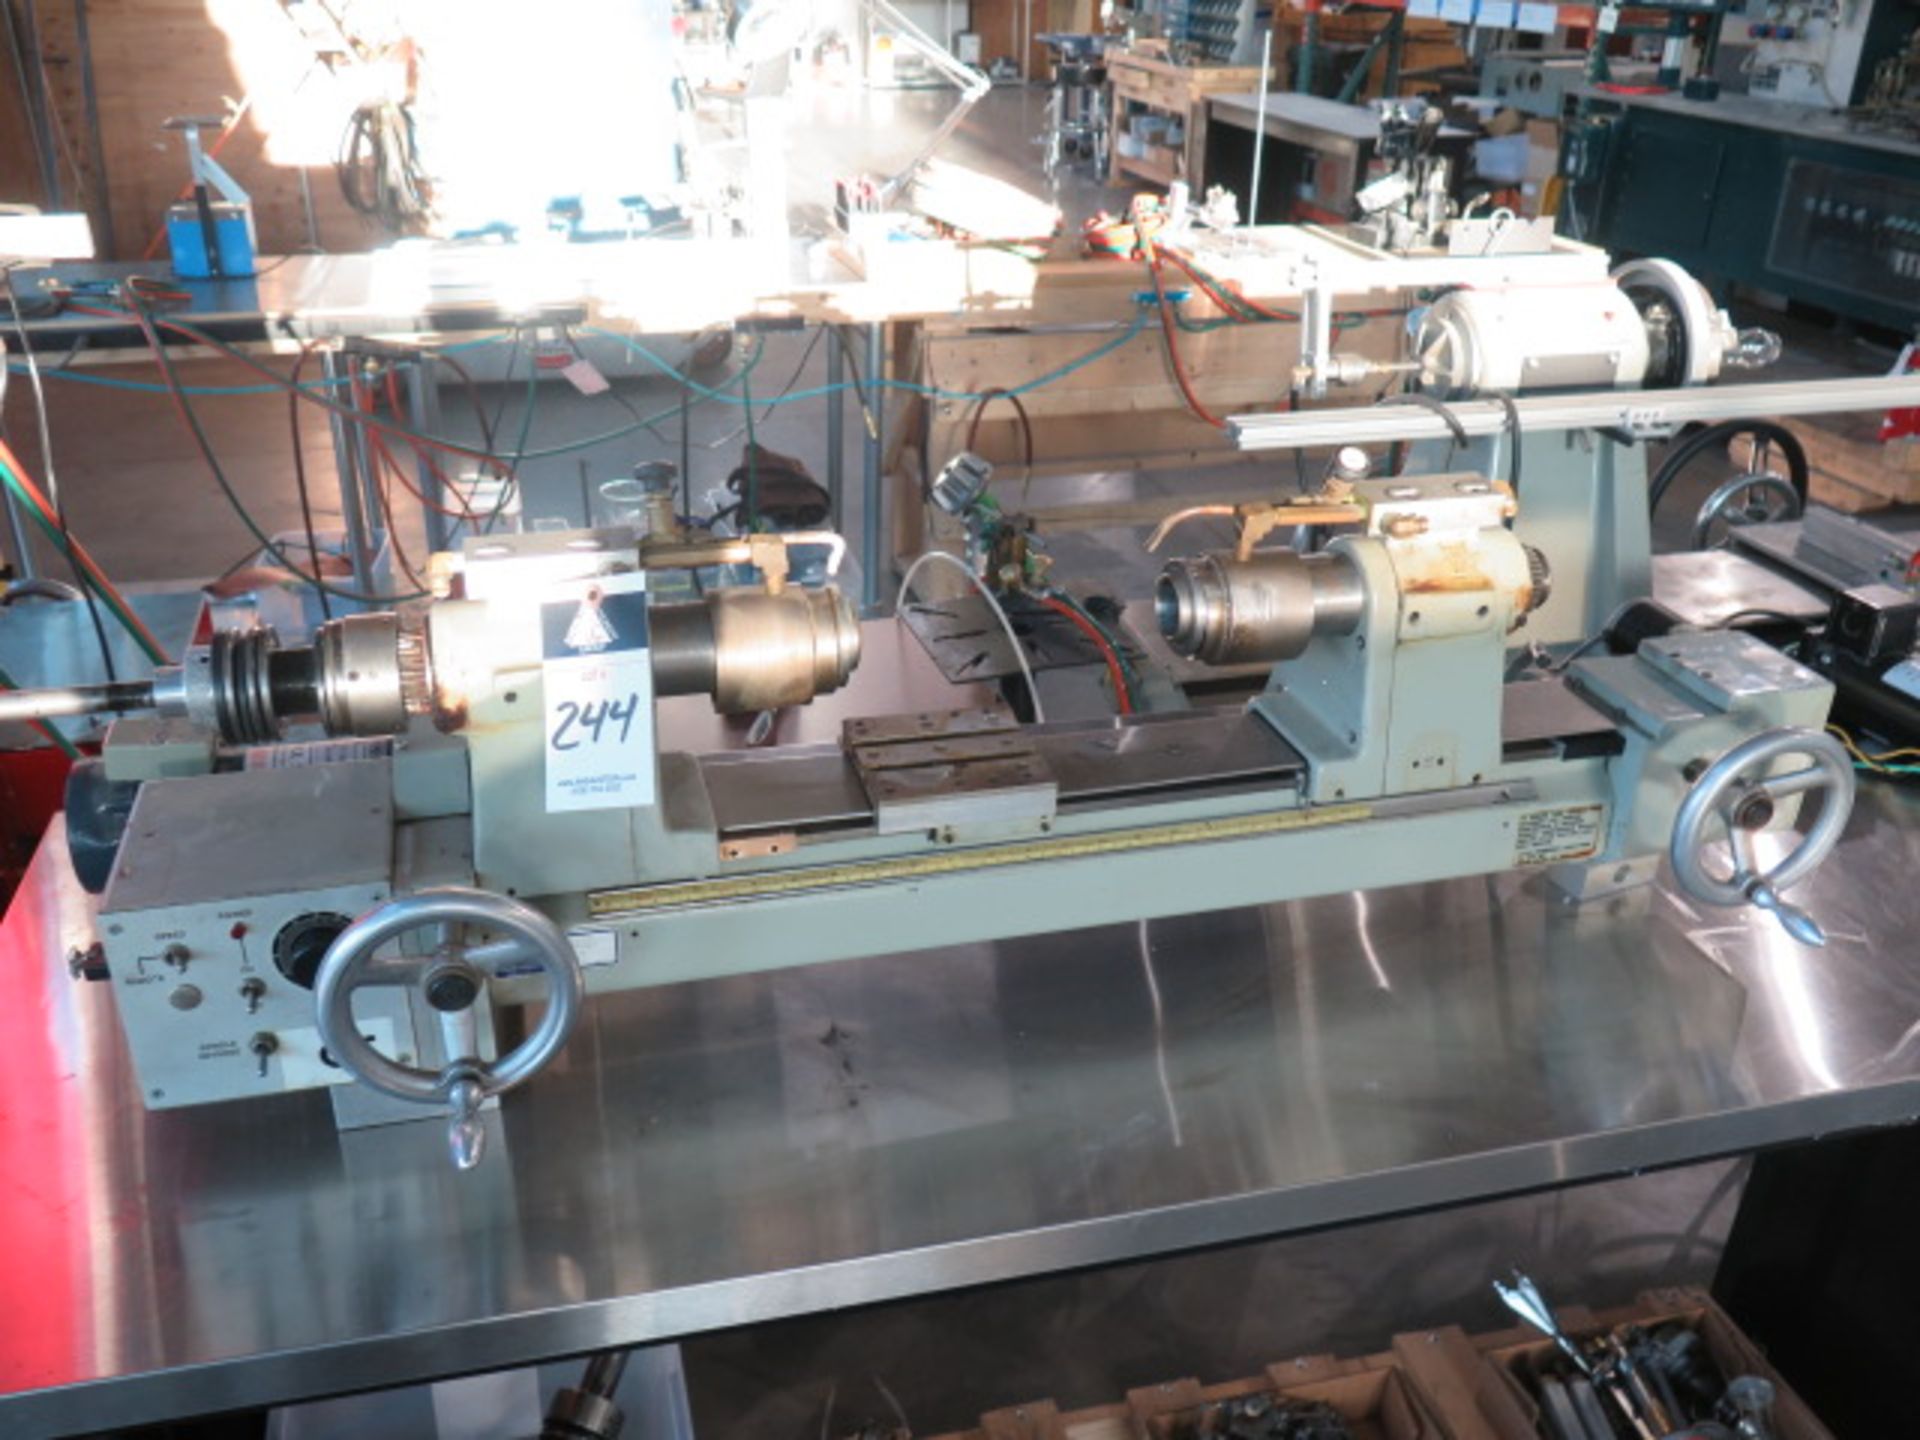 2000 Litton mmdl. F053 8” x 12” Glass Lathe s/n 1543R w/ Variable Speed Drive, 5C Colleted Heads,